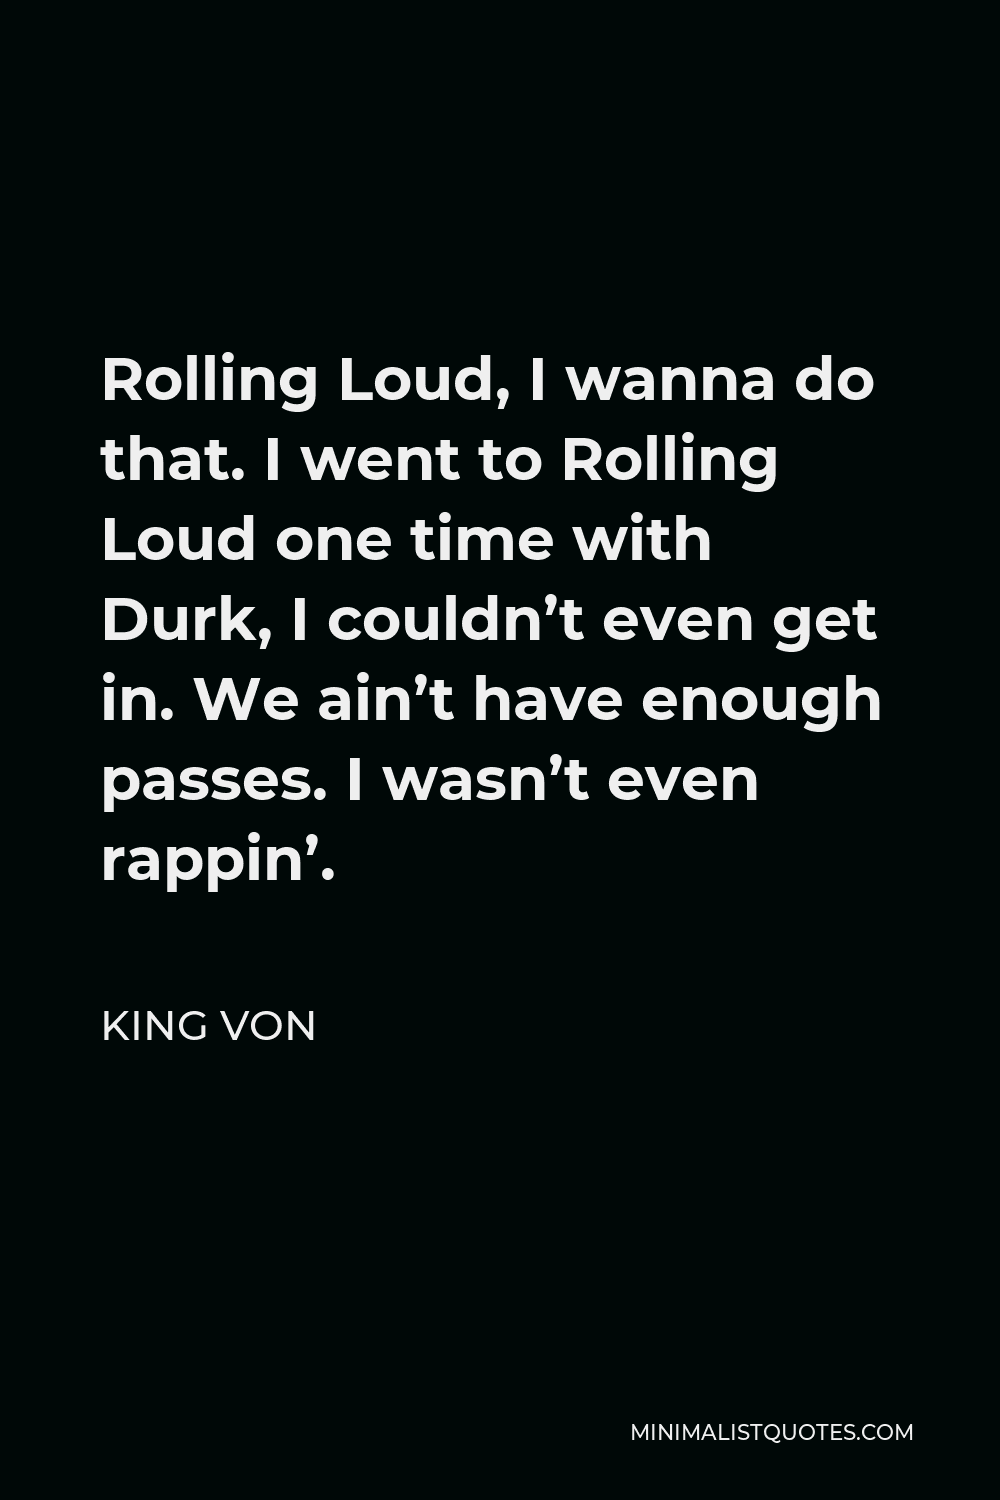 King Von Quote - Rolling Loud, I wanna do that. I went to Rolling Loud one time with Durk, I couldn’t even get in. We ain’t have enough passes. I wasn’t even rappin’.